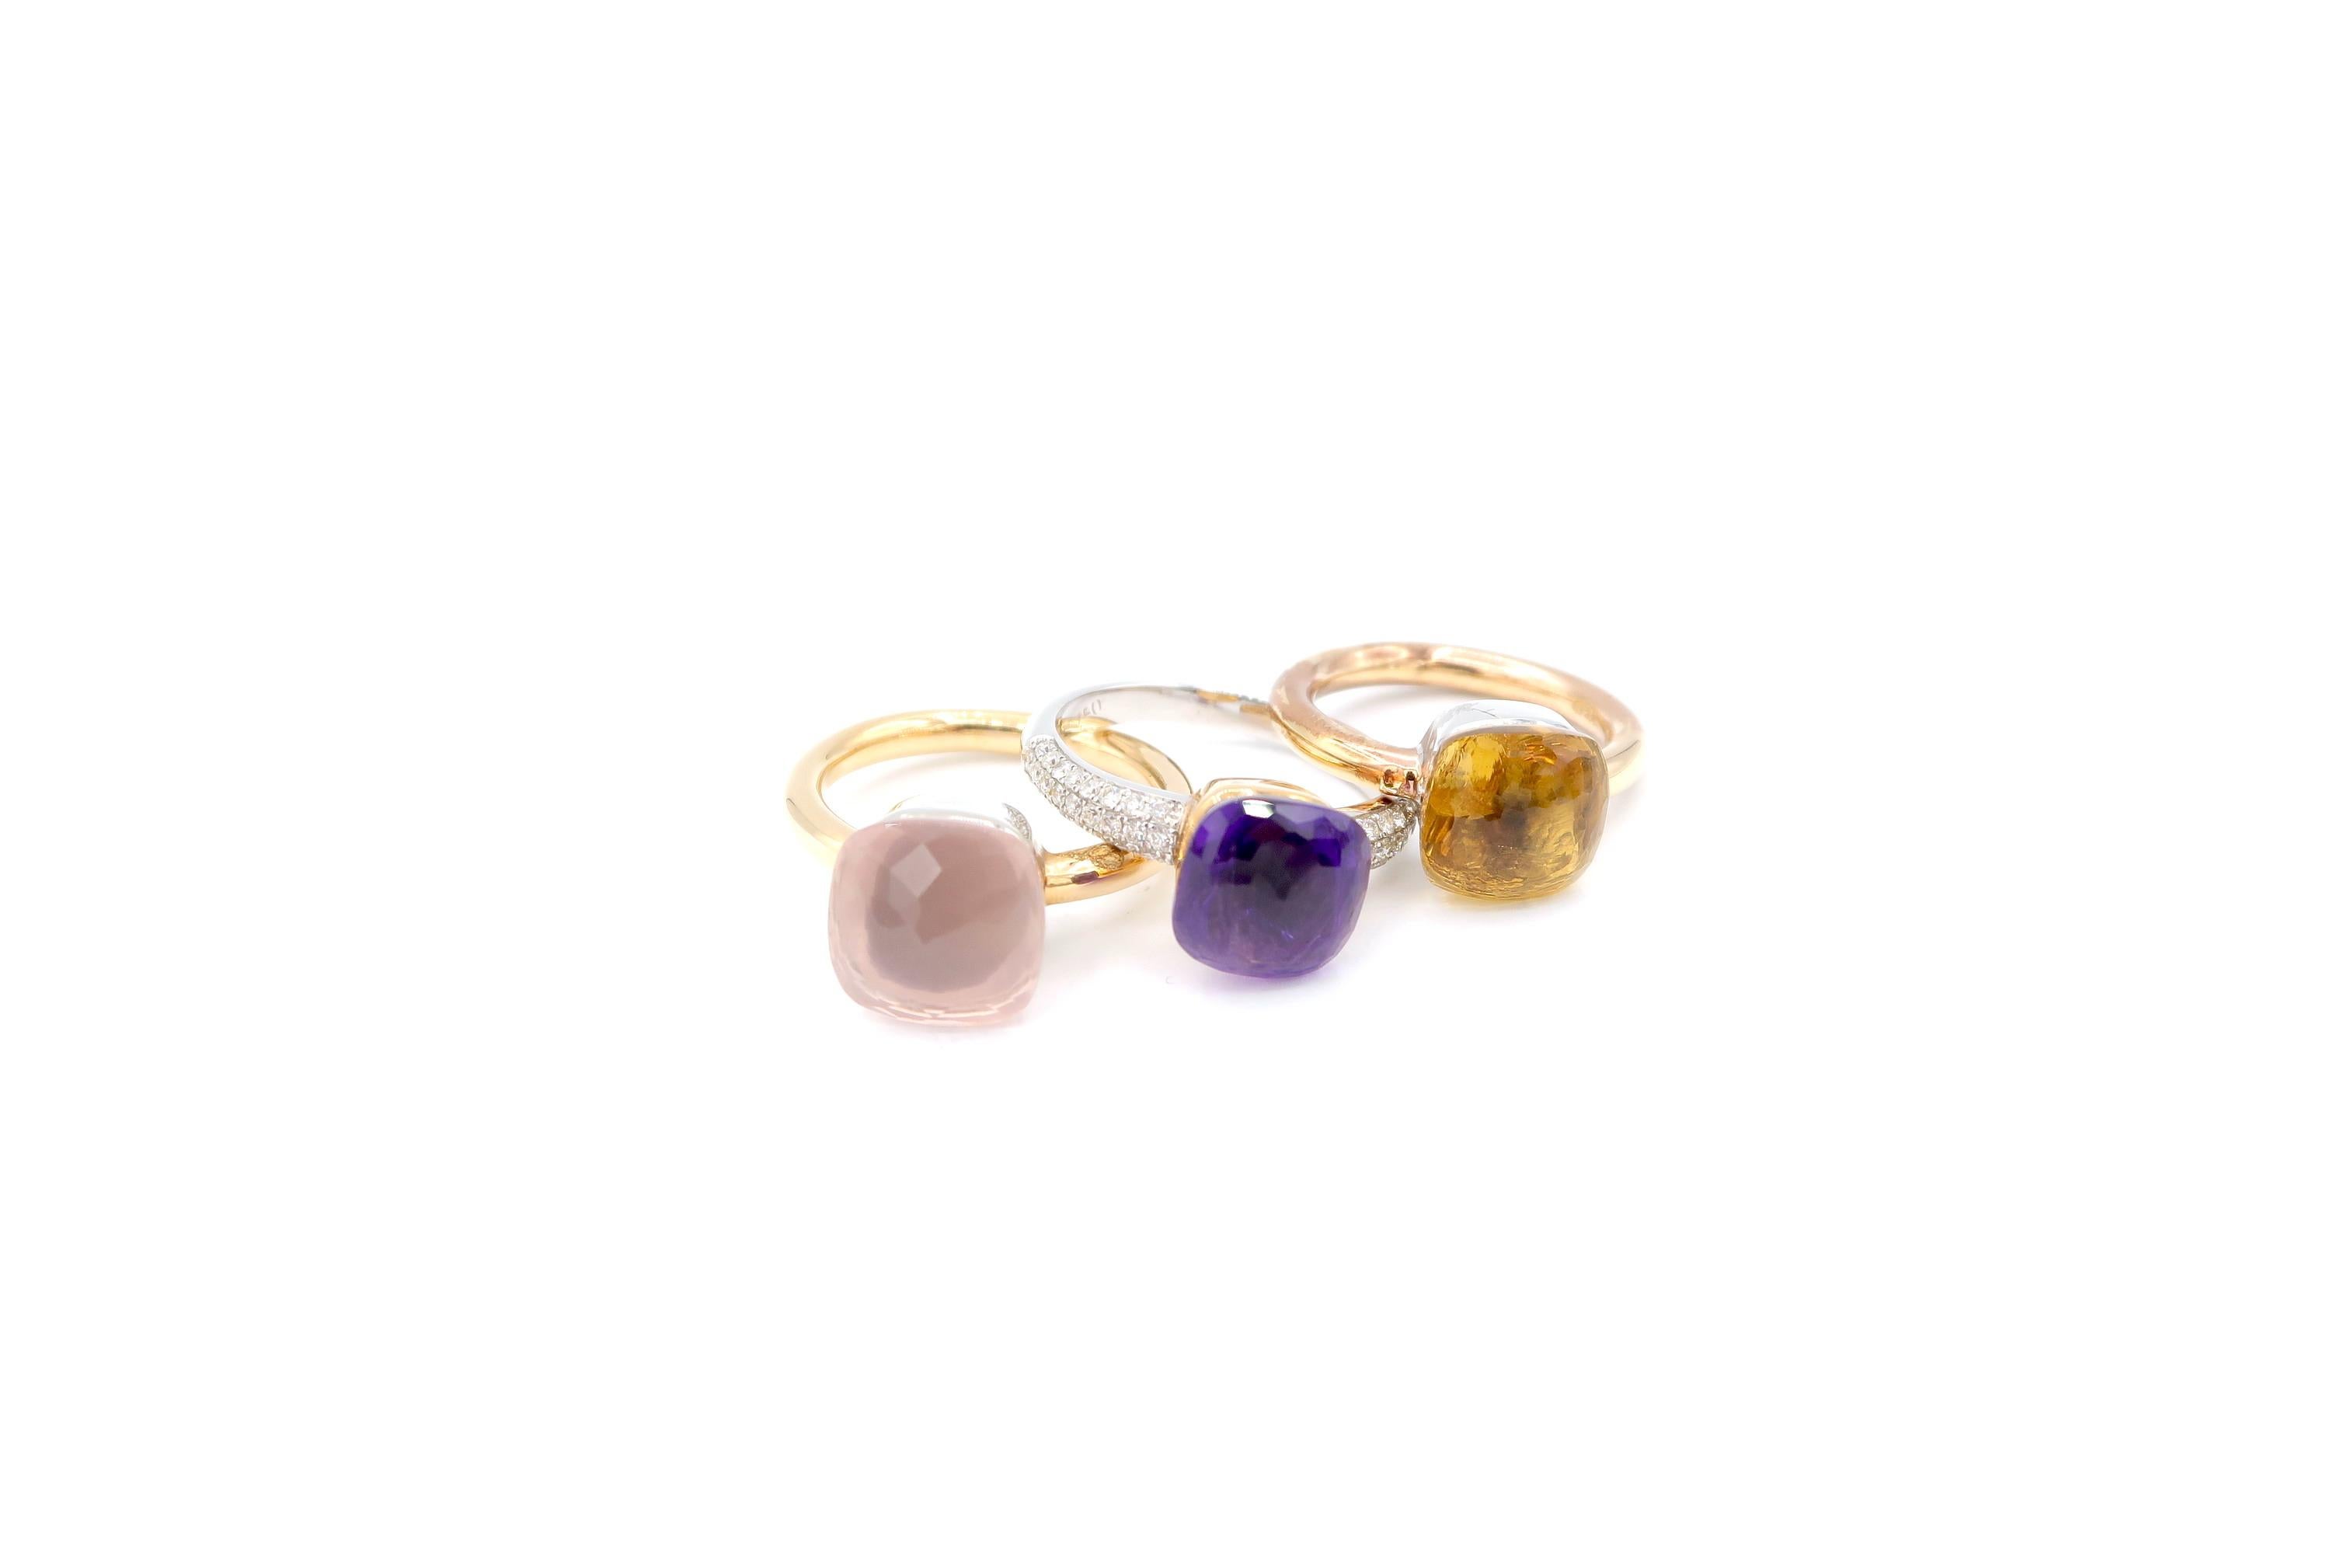 3 Gold Rings Set: Special Faceted Rose Quartz, Citrine, and Diamond Pavé Amethyst

Special Faceted Rose Quartz Plain Ring in 18K Gold 
Ring Size: 57
Rose Quartz: 5.05 ct
Gold: 18K Gold, 7.62 g

Special Faceted Citrine Plain Ring in 18K Gold 
Ring